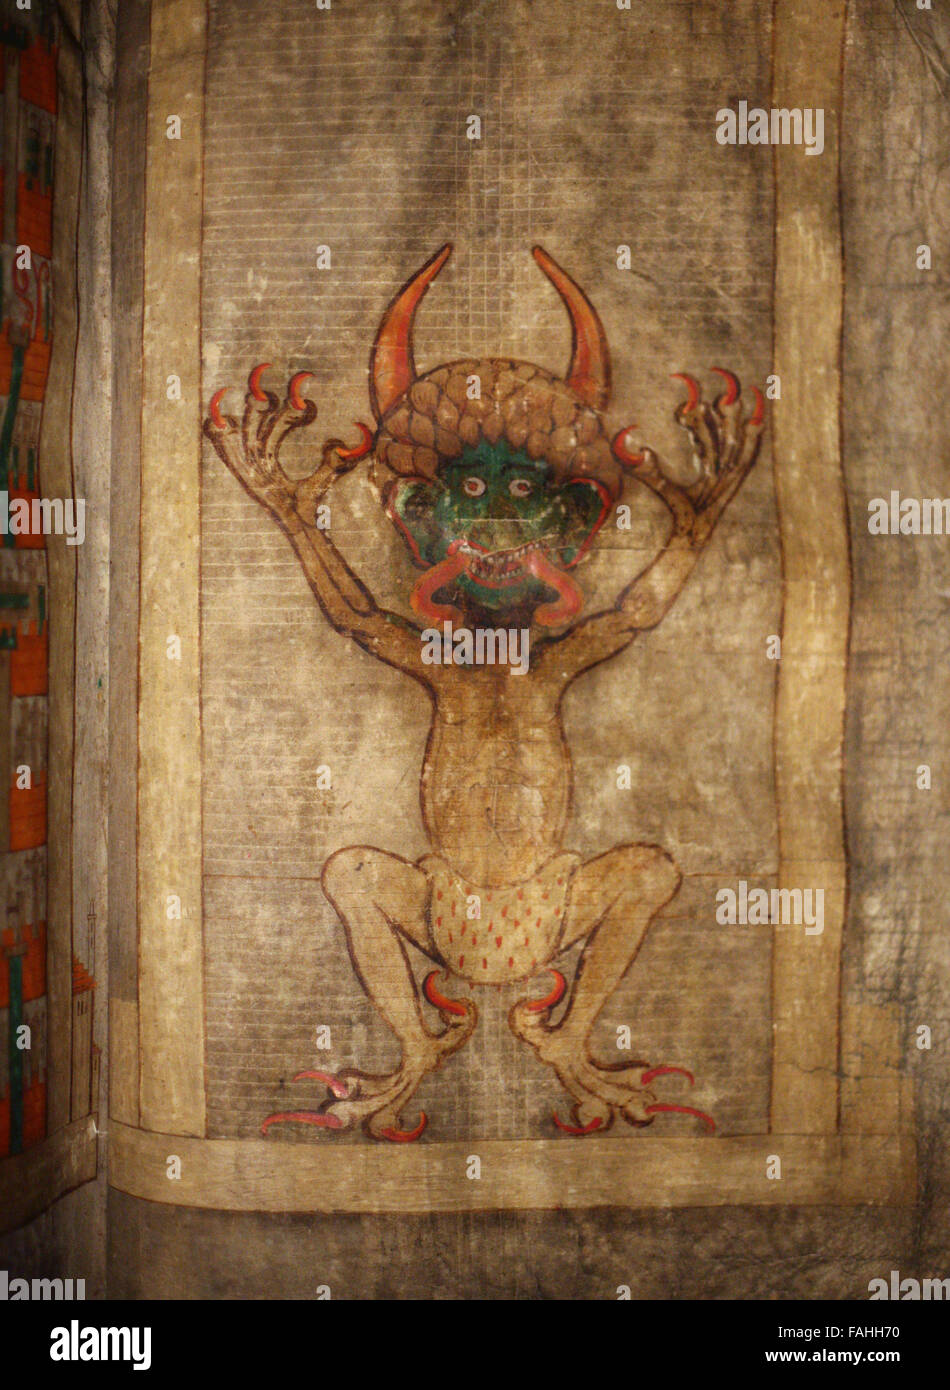 The devil depicted in the largest medieval manuscript in the world known as the Codex Gigas or also as the Devil's Bible displayed at the exhibition 'The Codex Gigas: the mystery of the largest book in the world' in the Czech National Library in Prague, Czech Republic, on September 19, 2007. The Codex Gigas was created in the early 12th century in the Benedictine monastery of Podlazice in Bohemia, now in the Czech Republic. It is known as the Devil's Bible because of a large illustration of the devil on the inside. At the end of the Thirty Years War in 1648 the manuscript was taken as war boot Stock Photo